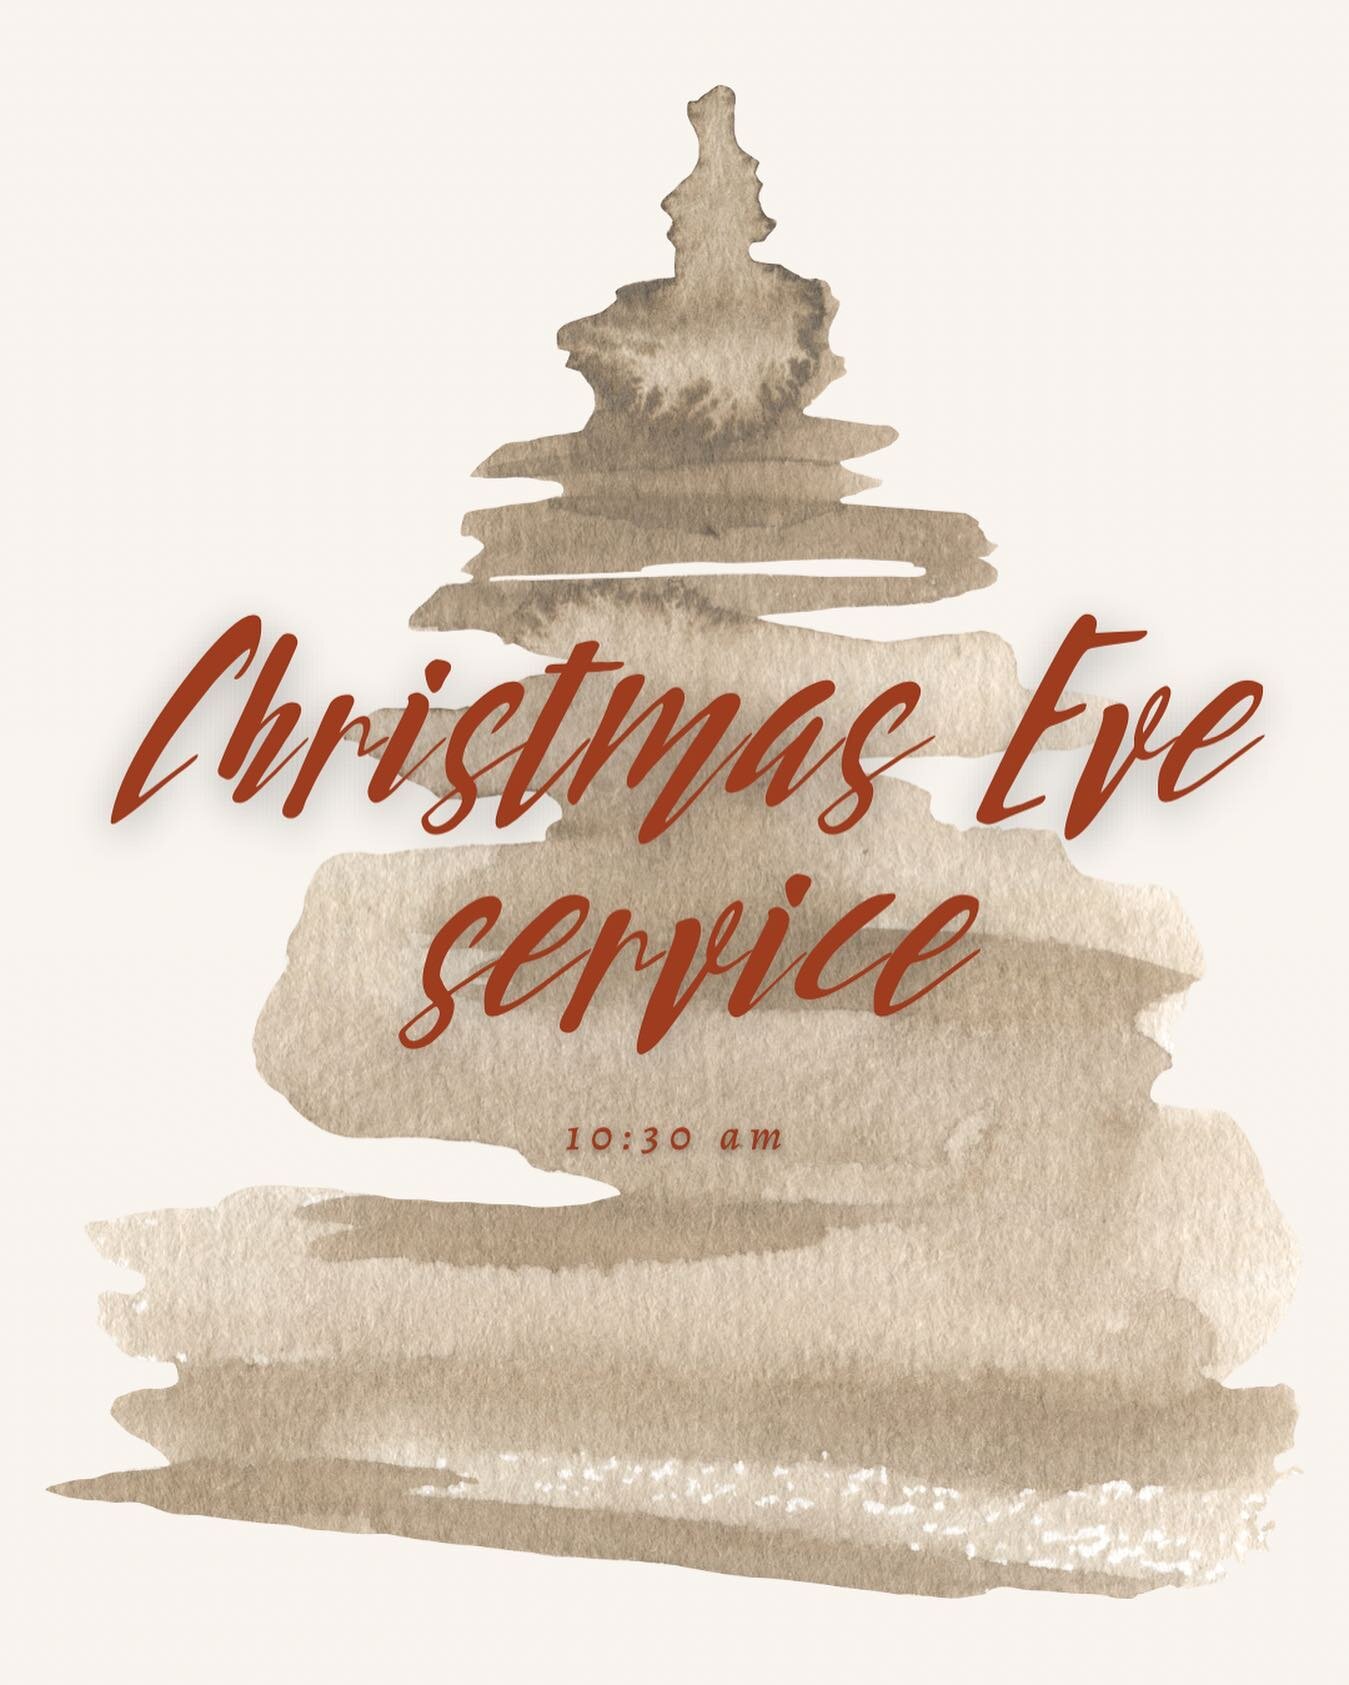 Join us Sunday morning for our Christmas Eve Service! This will take place during a normal Sunday service hour, 10:30am. 
Come and enjoy music, Scripture readings and a kids time! This will be a great way to prepare our hearts and keep our focus on t